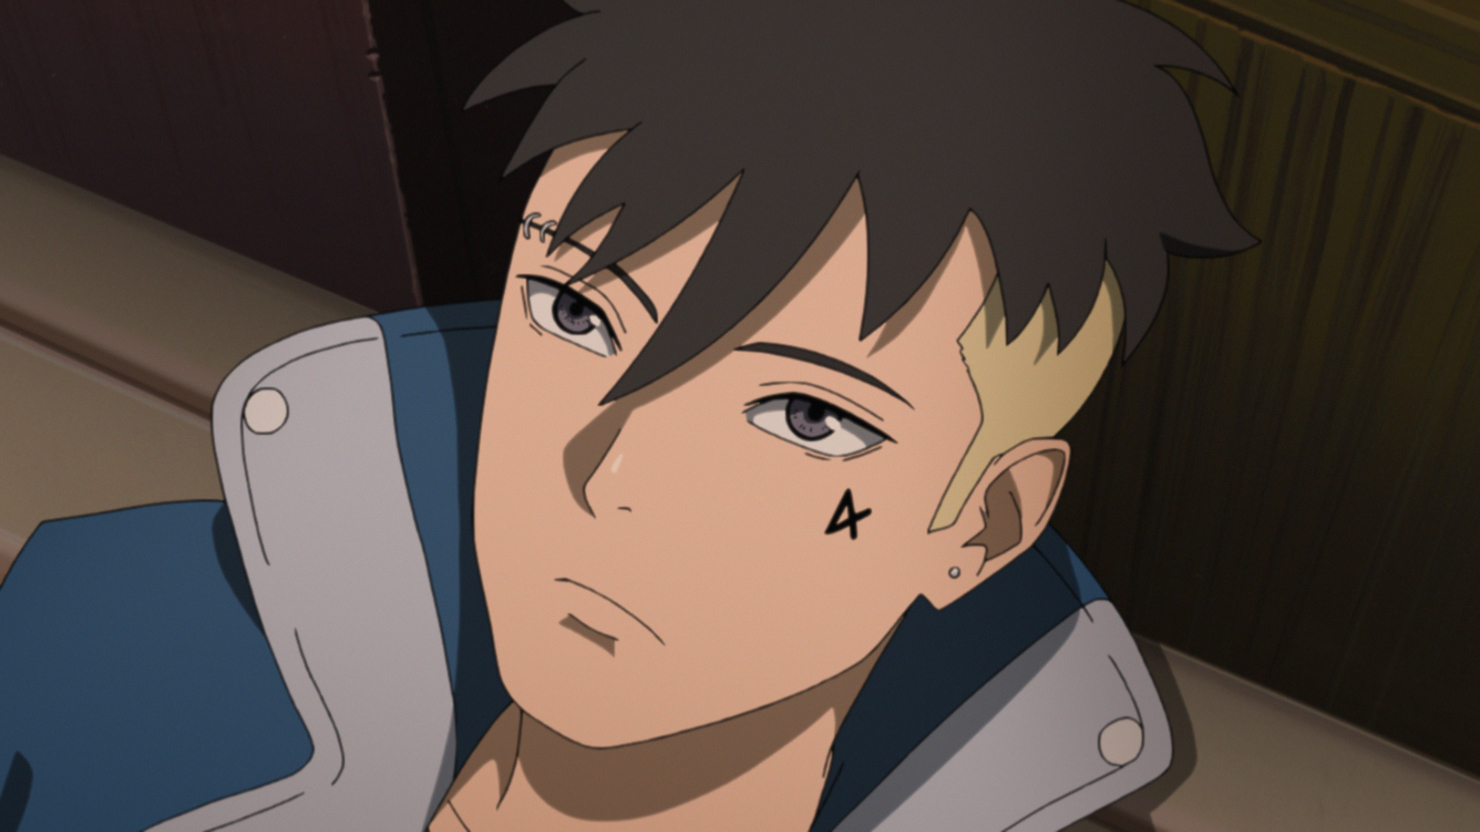 Kawaki stares upward with a blank expression on his face in a scene from the BORUTO: NARUTO NEXT GENERATIONS TV anime.